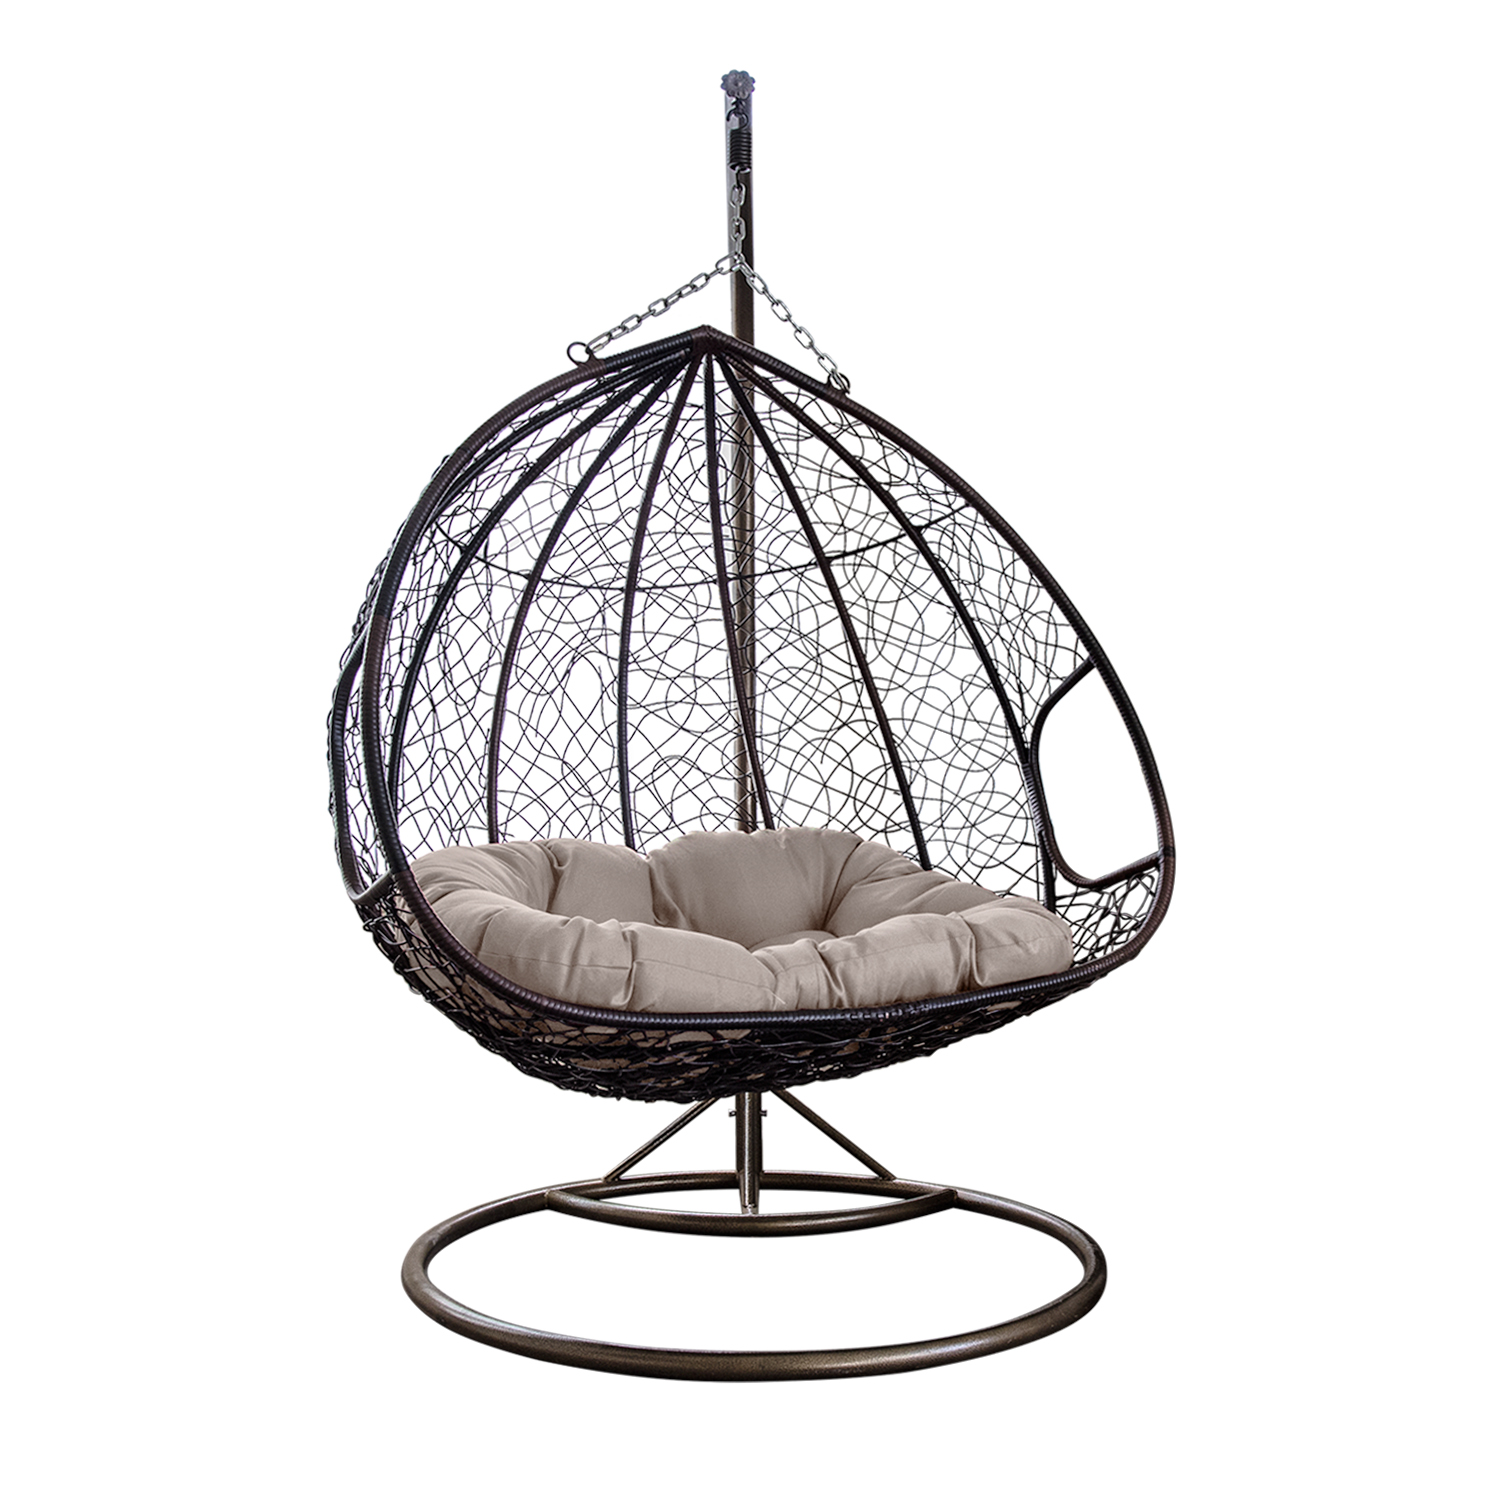 Outdoor Wicker Swing Chair - Double Seats with Rack Handle, Red Cushion Mat & Support Frame - image 4 of 7